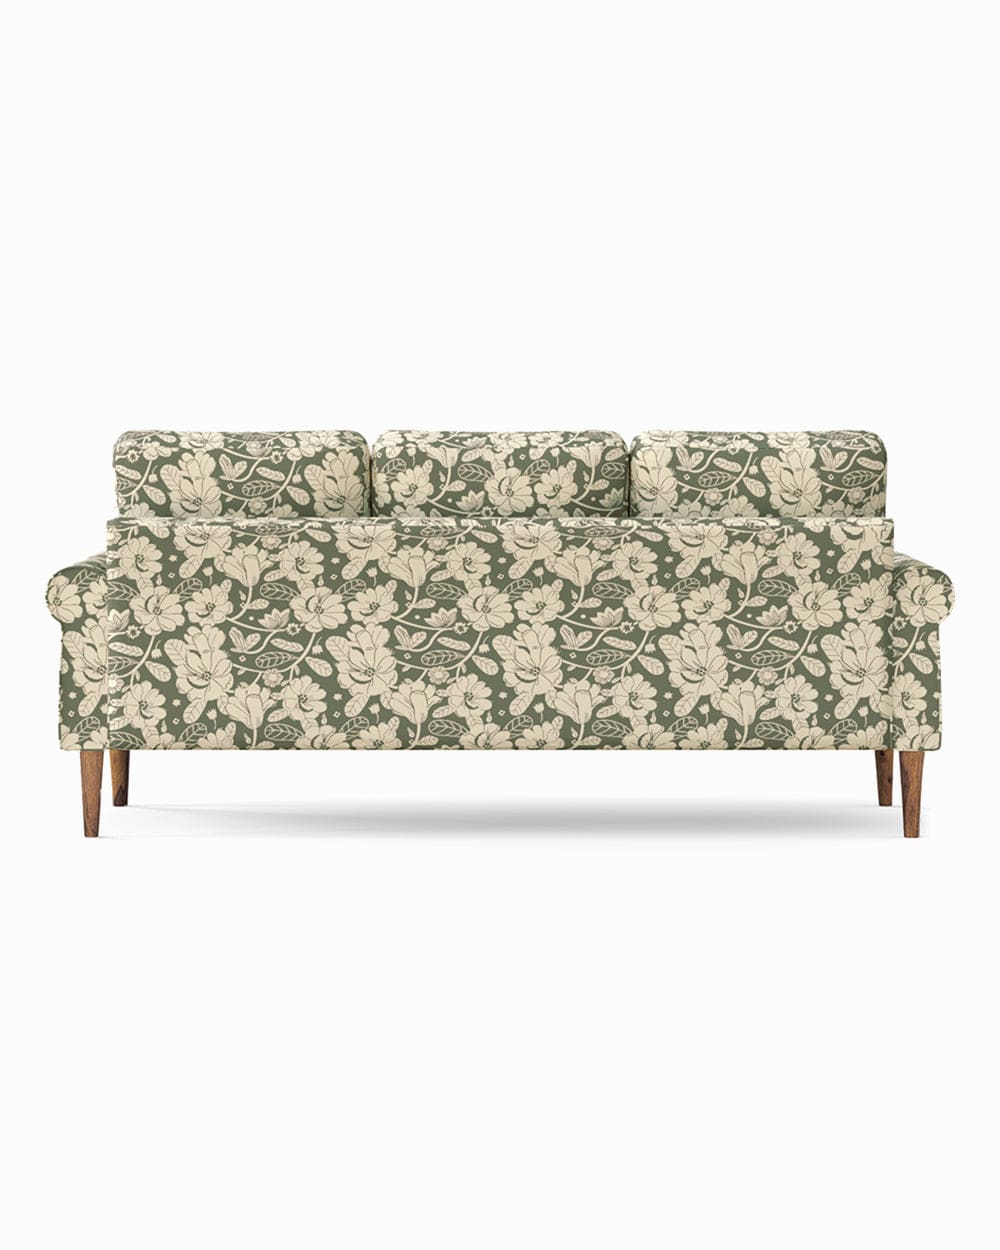 Colonial Couch 3 Seater Greys Garden Grey